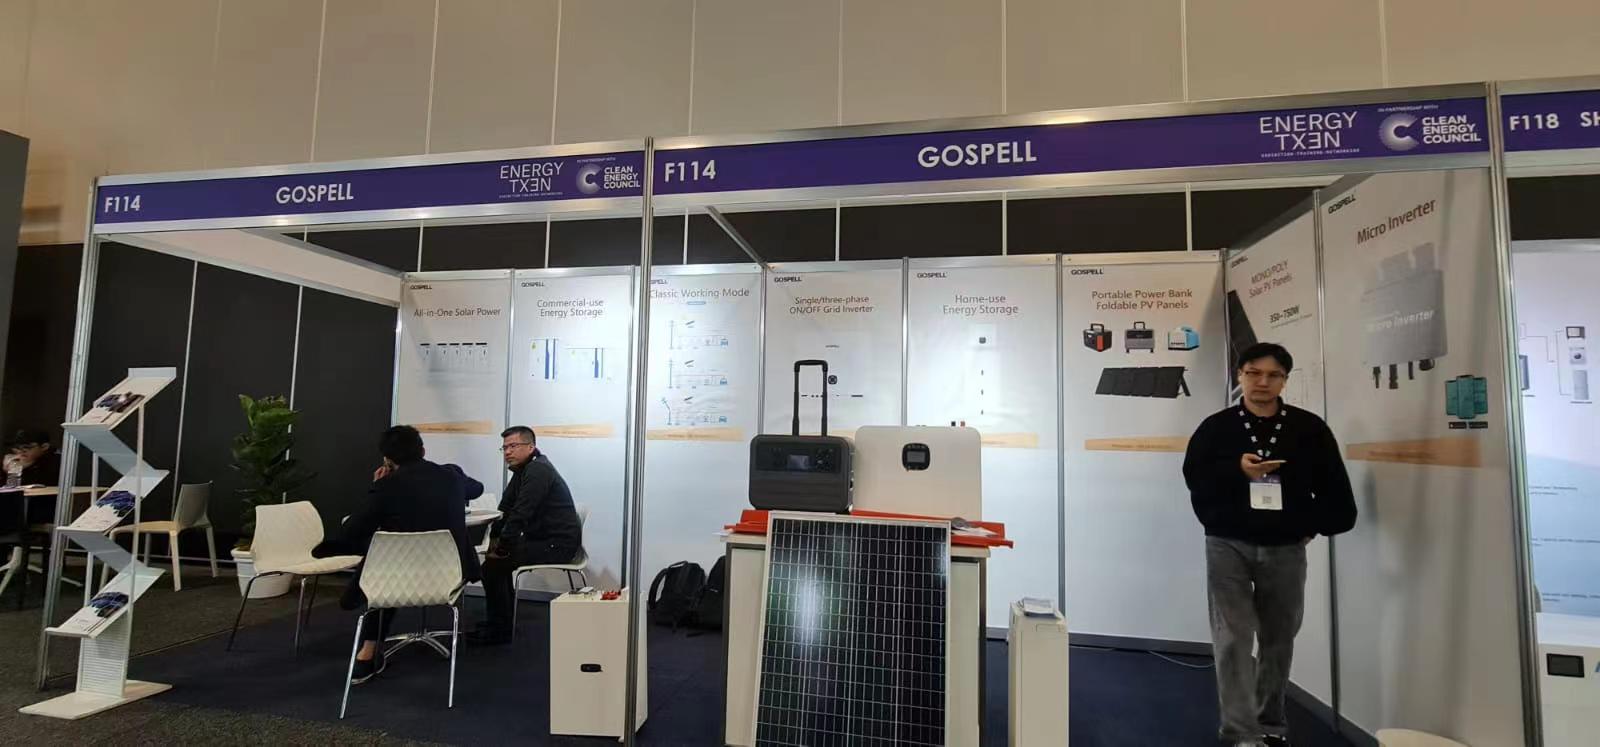 GOSPELL: Embracing the Future in Solar Photovoltaic Industry